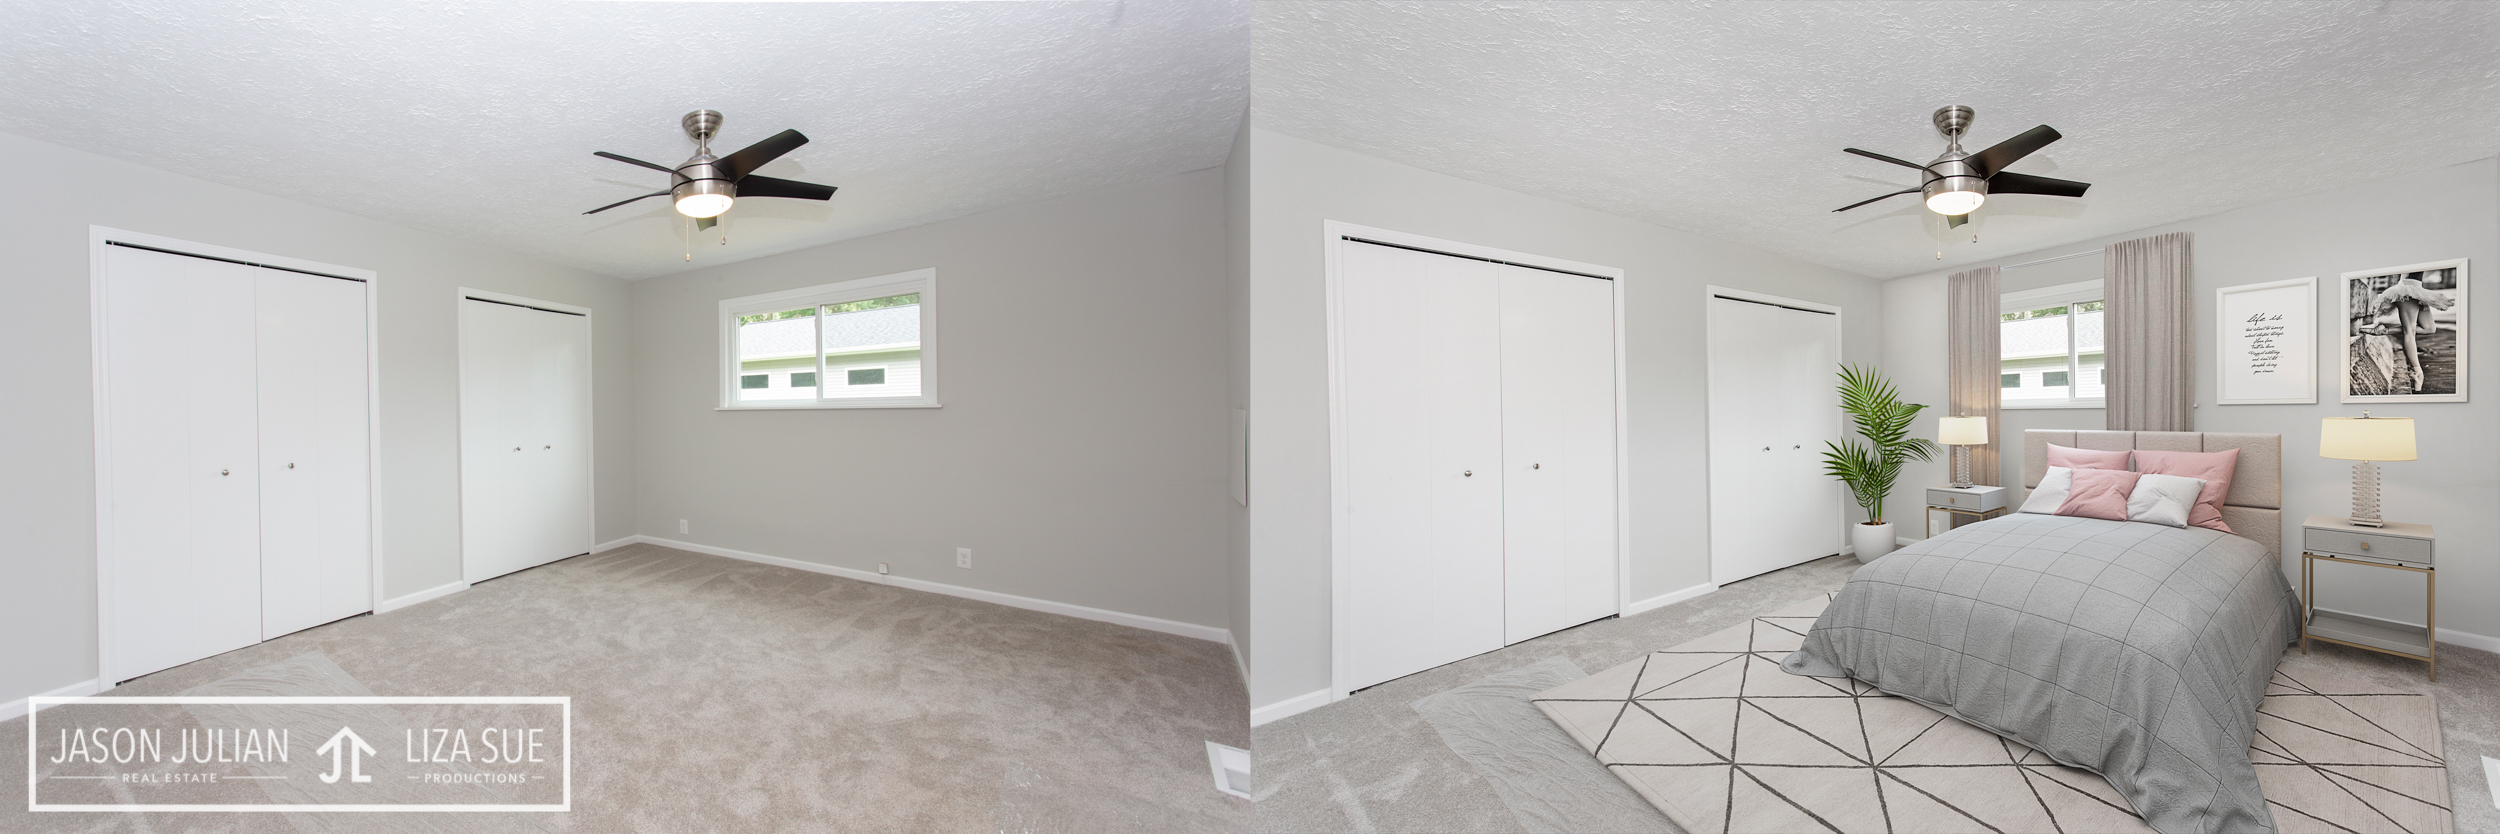 Virtual Staging Cleveland Akron before after